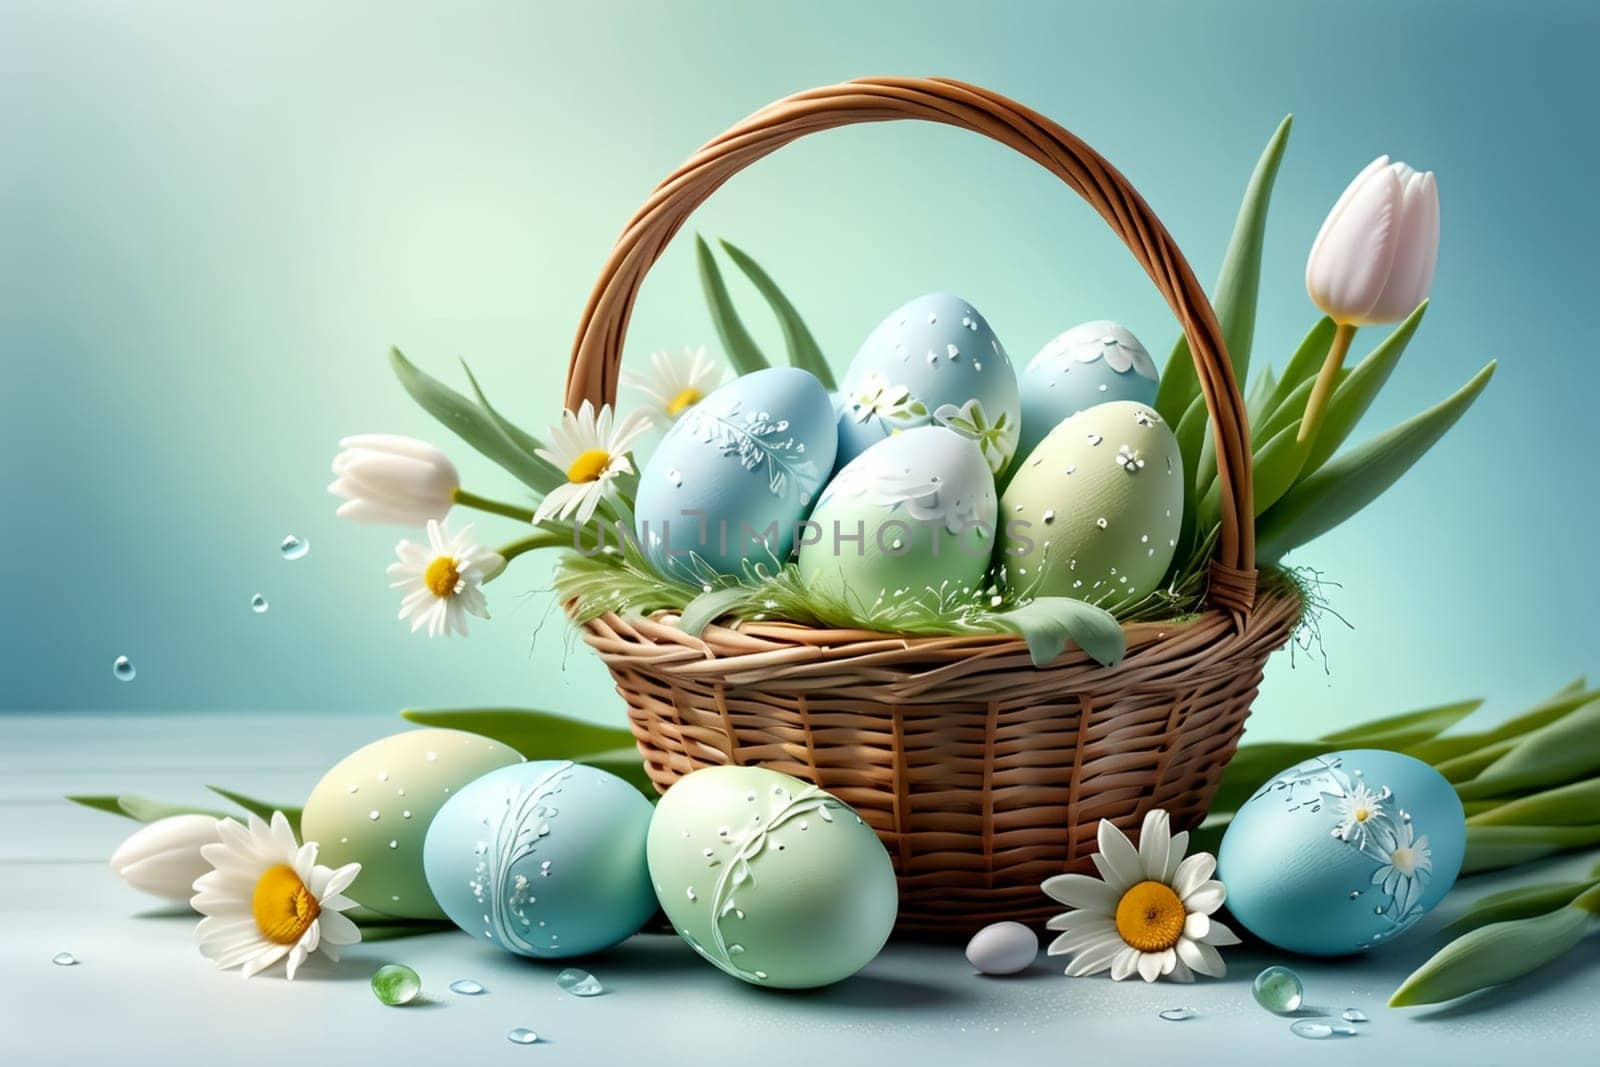 Easter greeting card, colorful Easter eggs .